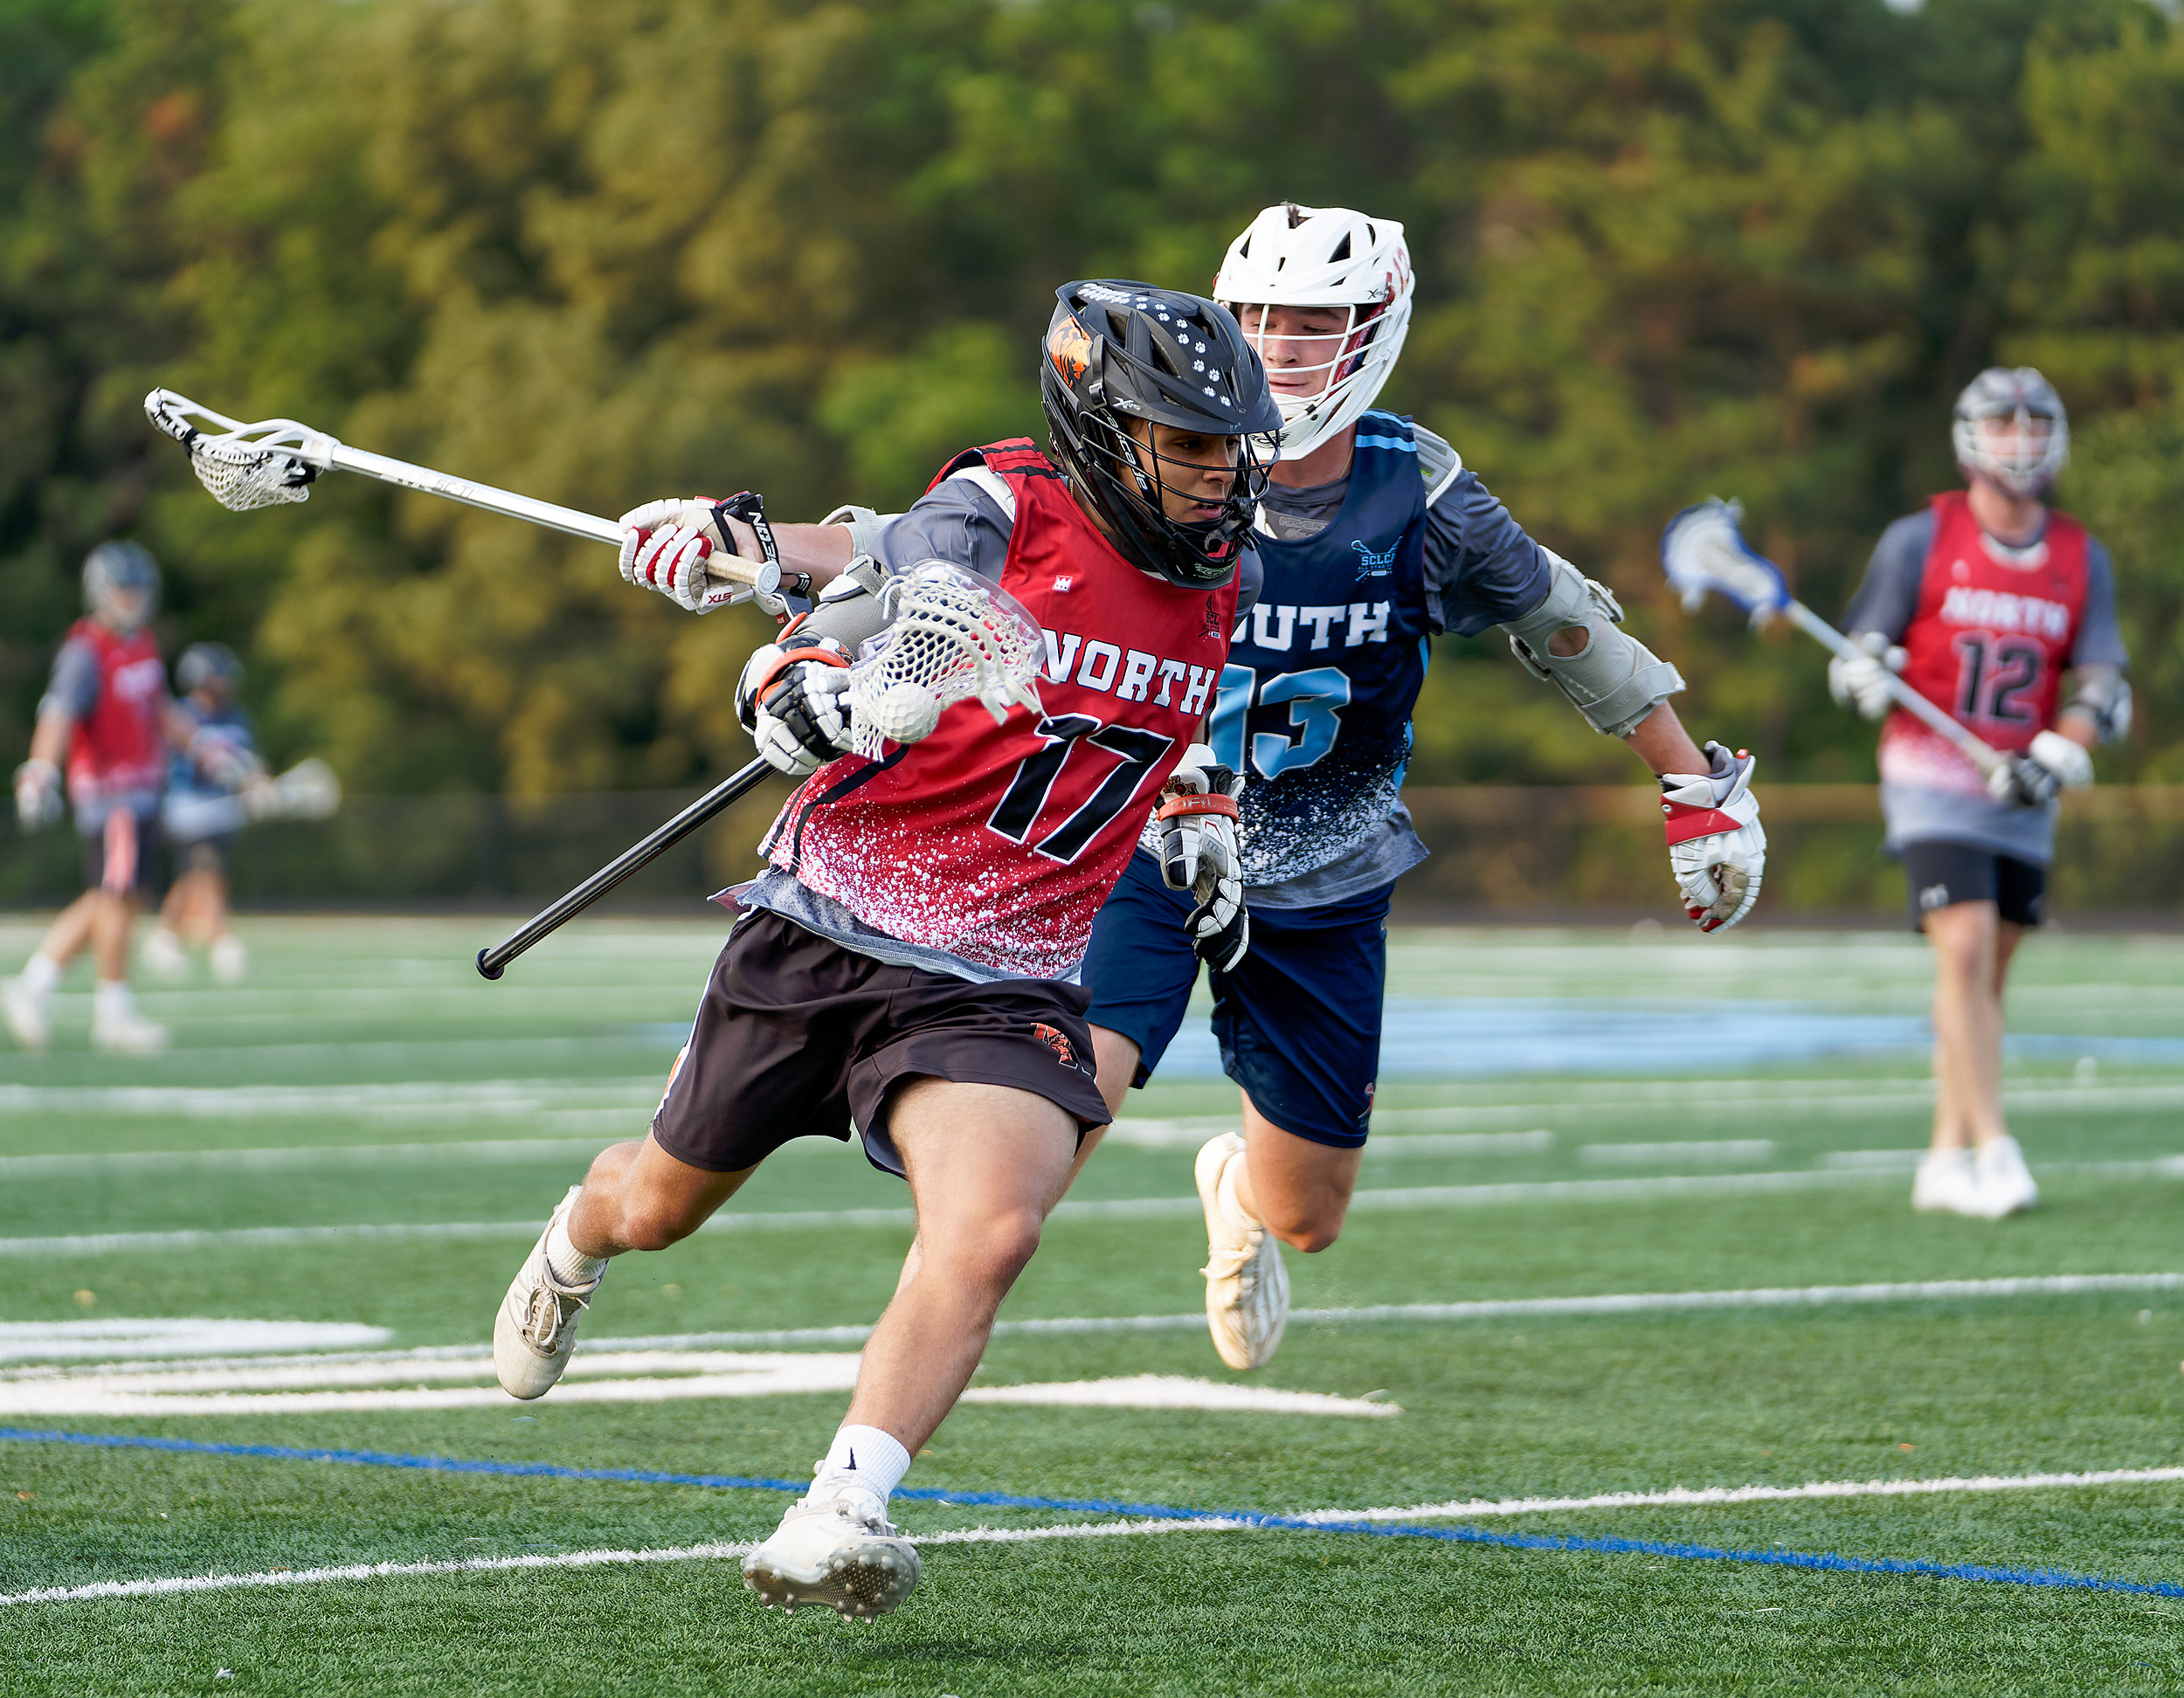 South Beats North in Shore Boys Lacrosse Senior All-Star Game